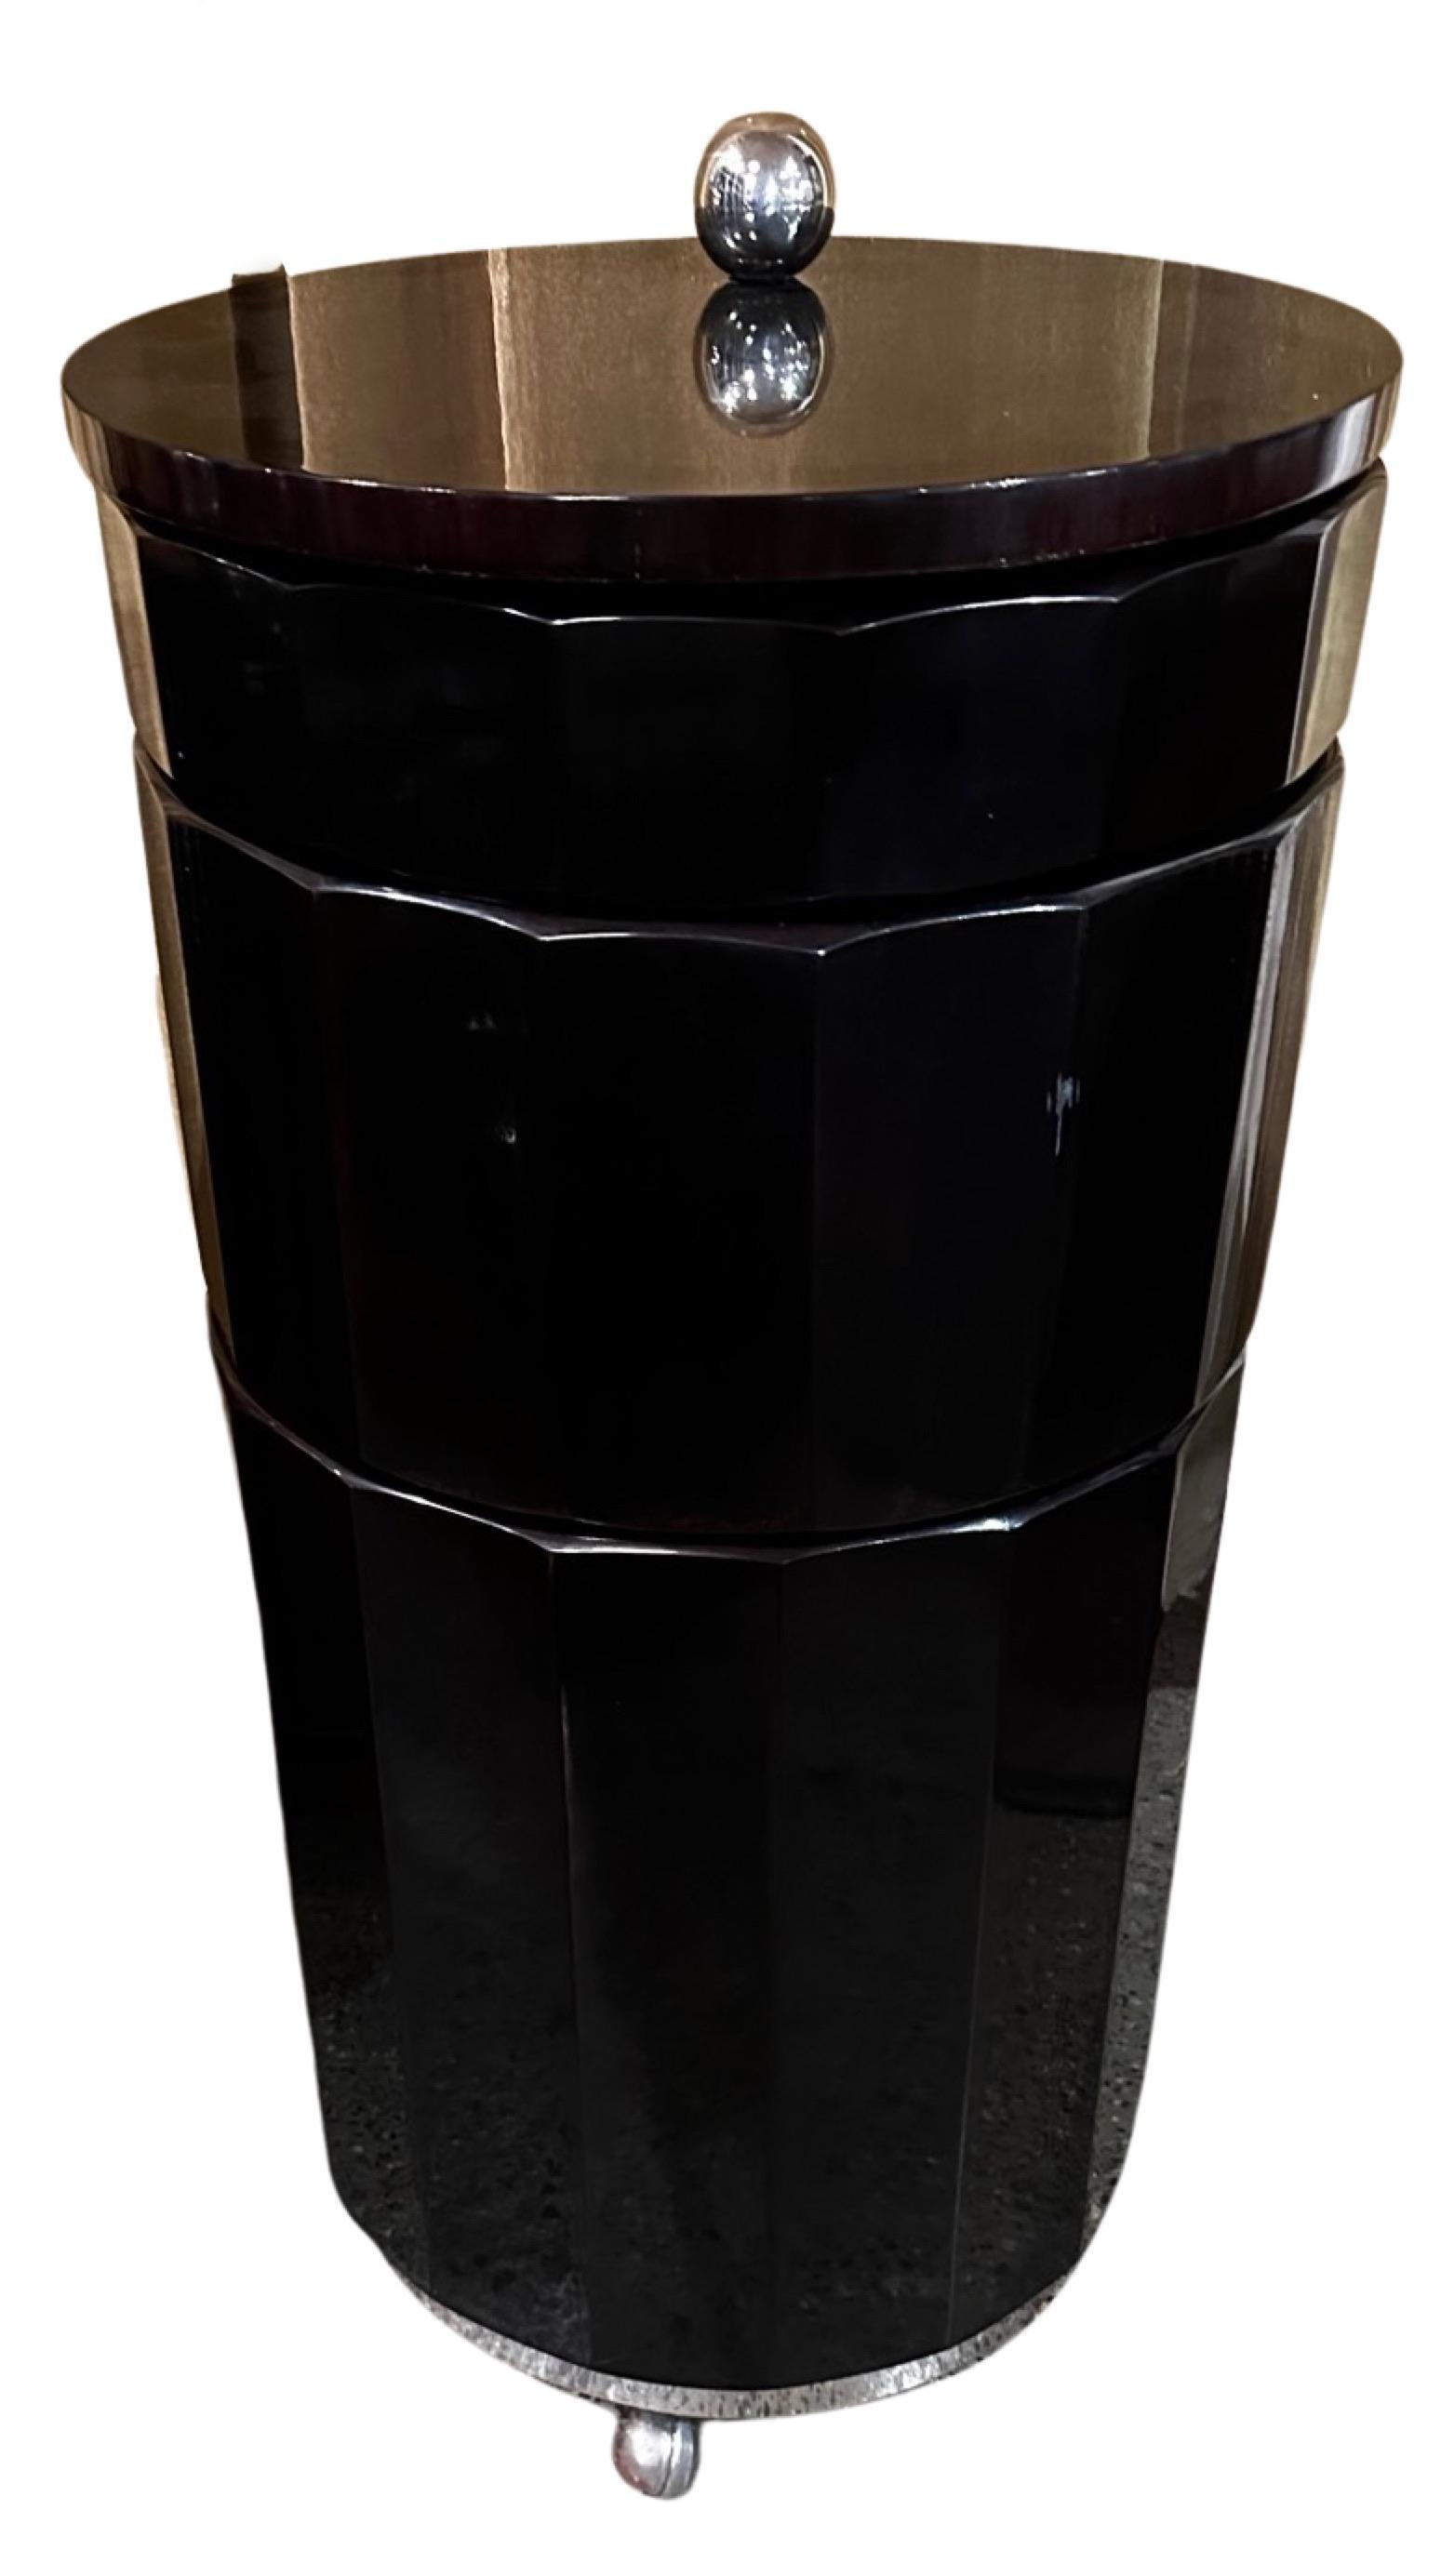 Art Deco Styled Bar Cart, like an elegant  ”Barrel of Fun” with a fluted ebonized exterior and red lacquer interior and all of it mounted on casters and “ready to roll”.  When closed, with its smartly black top it makes a slim side table, then the